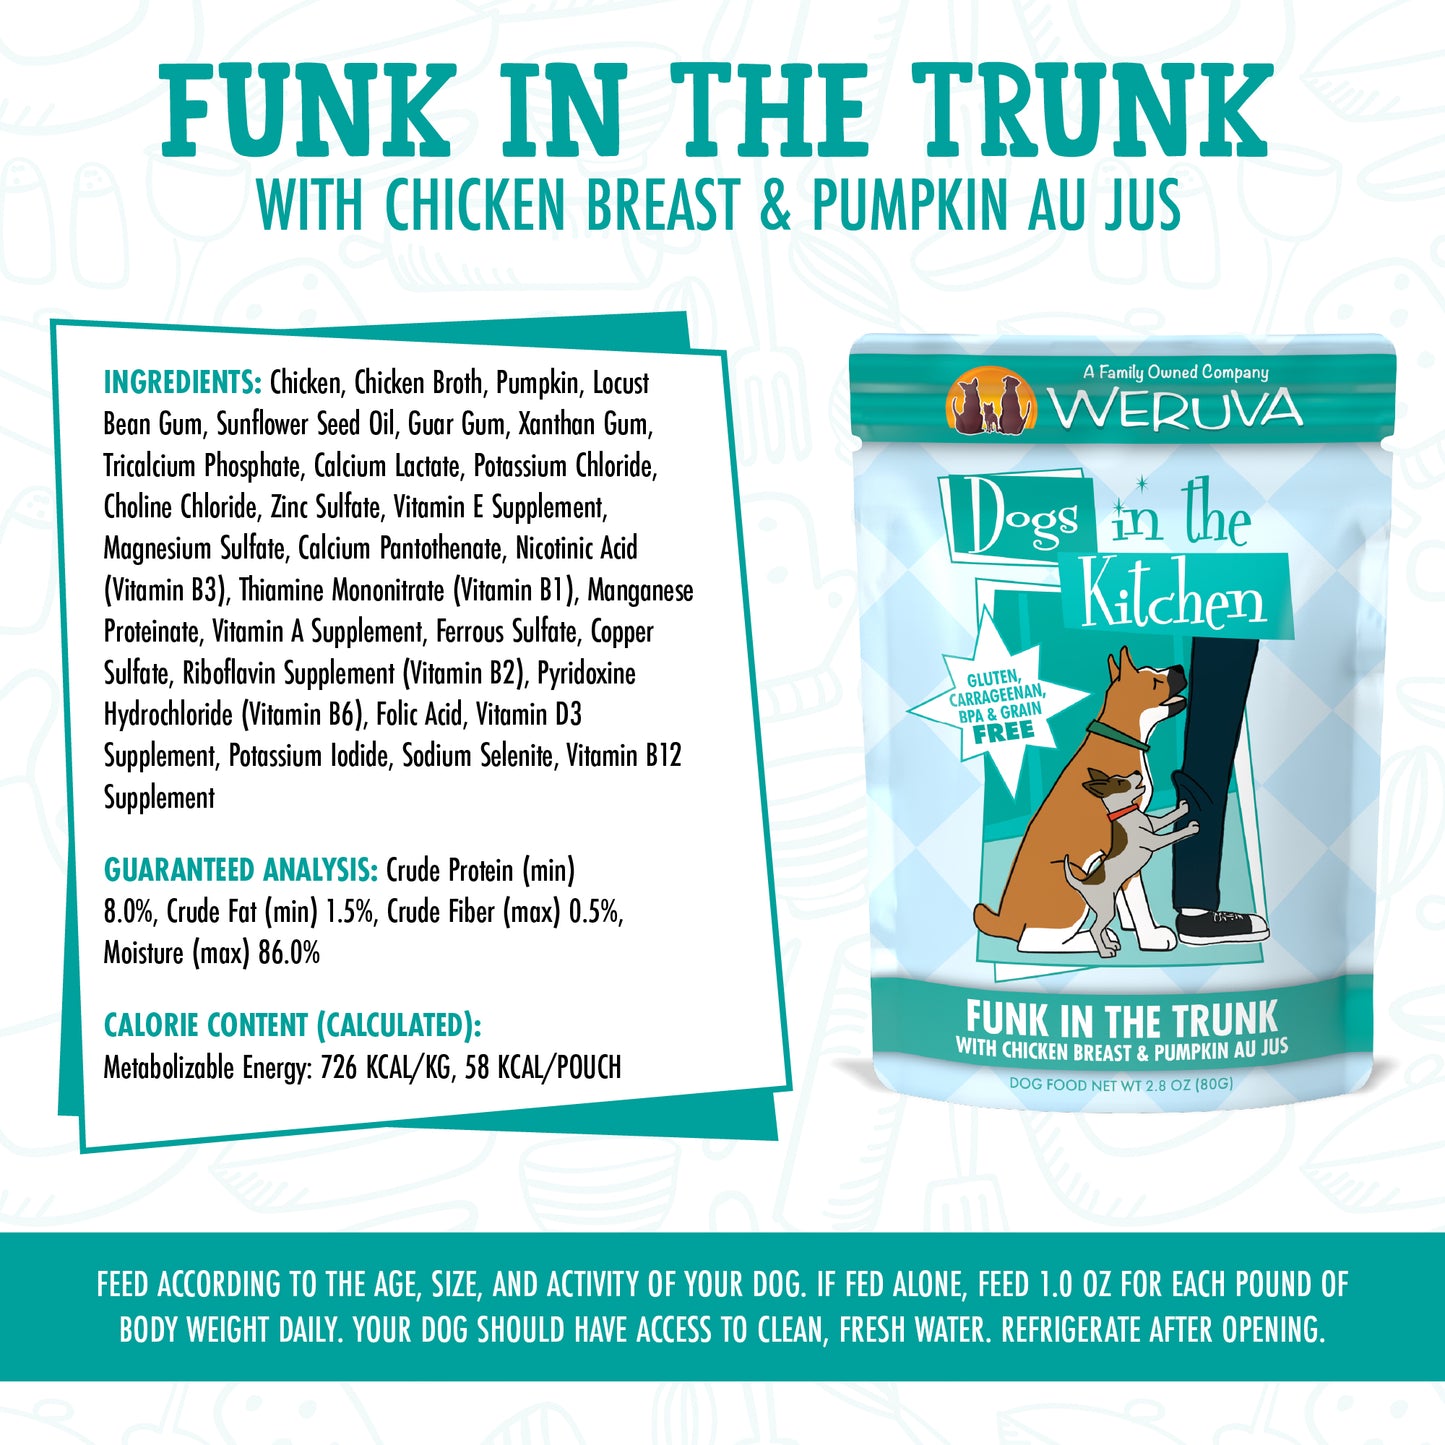 Dogs in the Kitchen "Funk in the Trunk" with Chicken & Pumpkin Au Jus (2.8 oz Pouch)